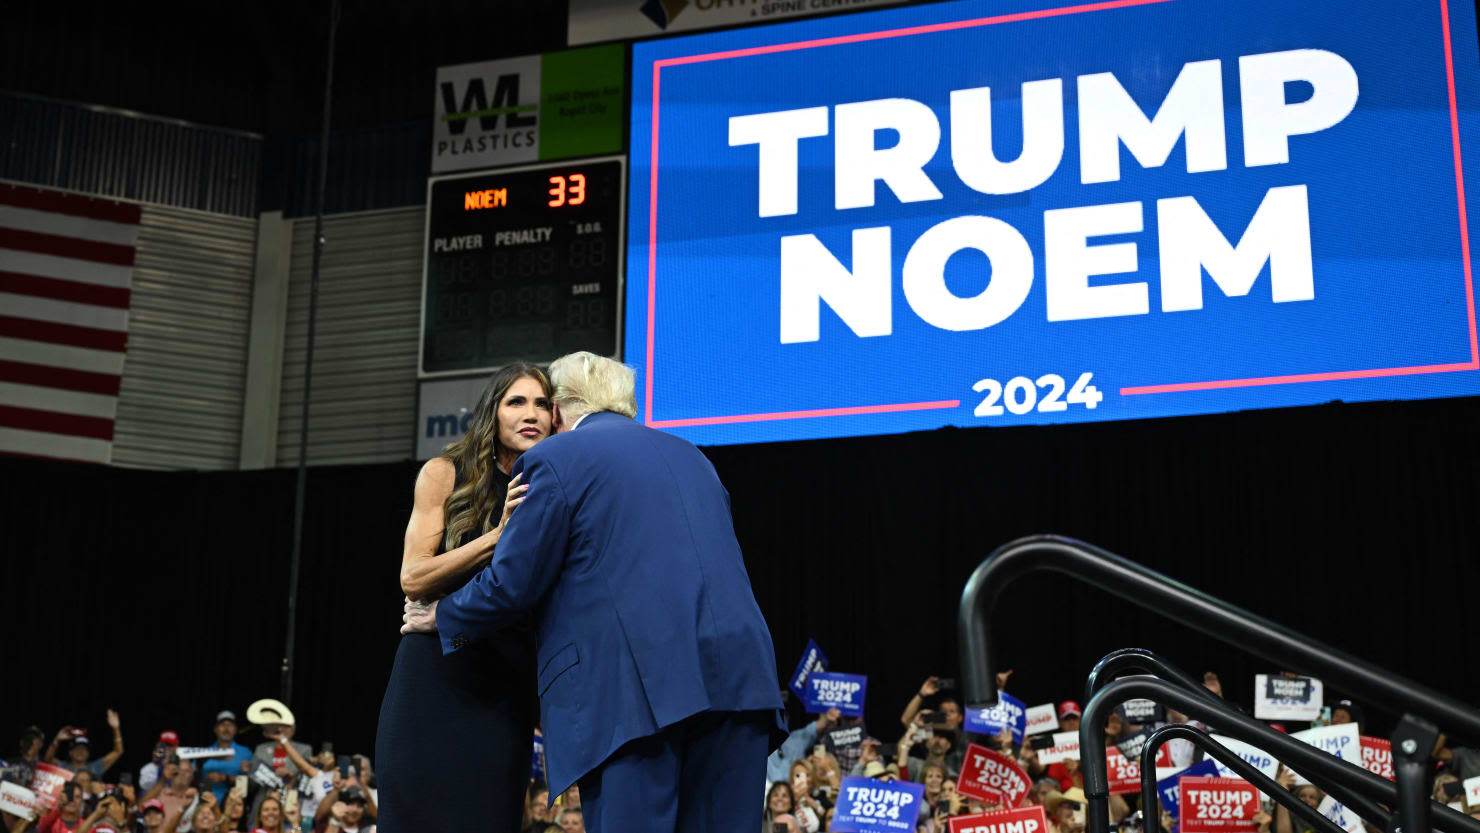 Trump Reportedly Now Joking About Noem to Friends